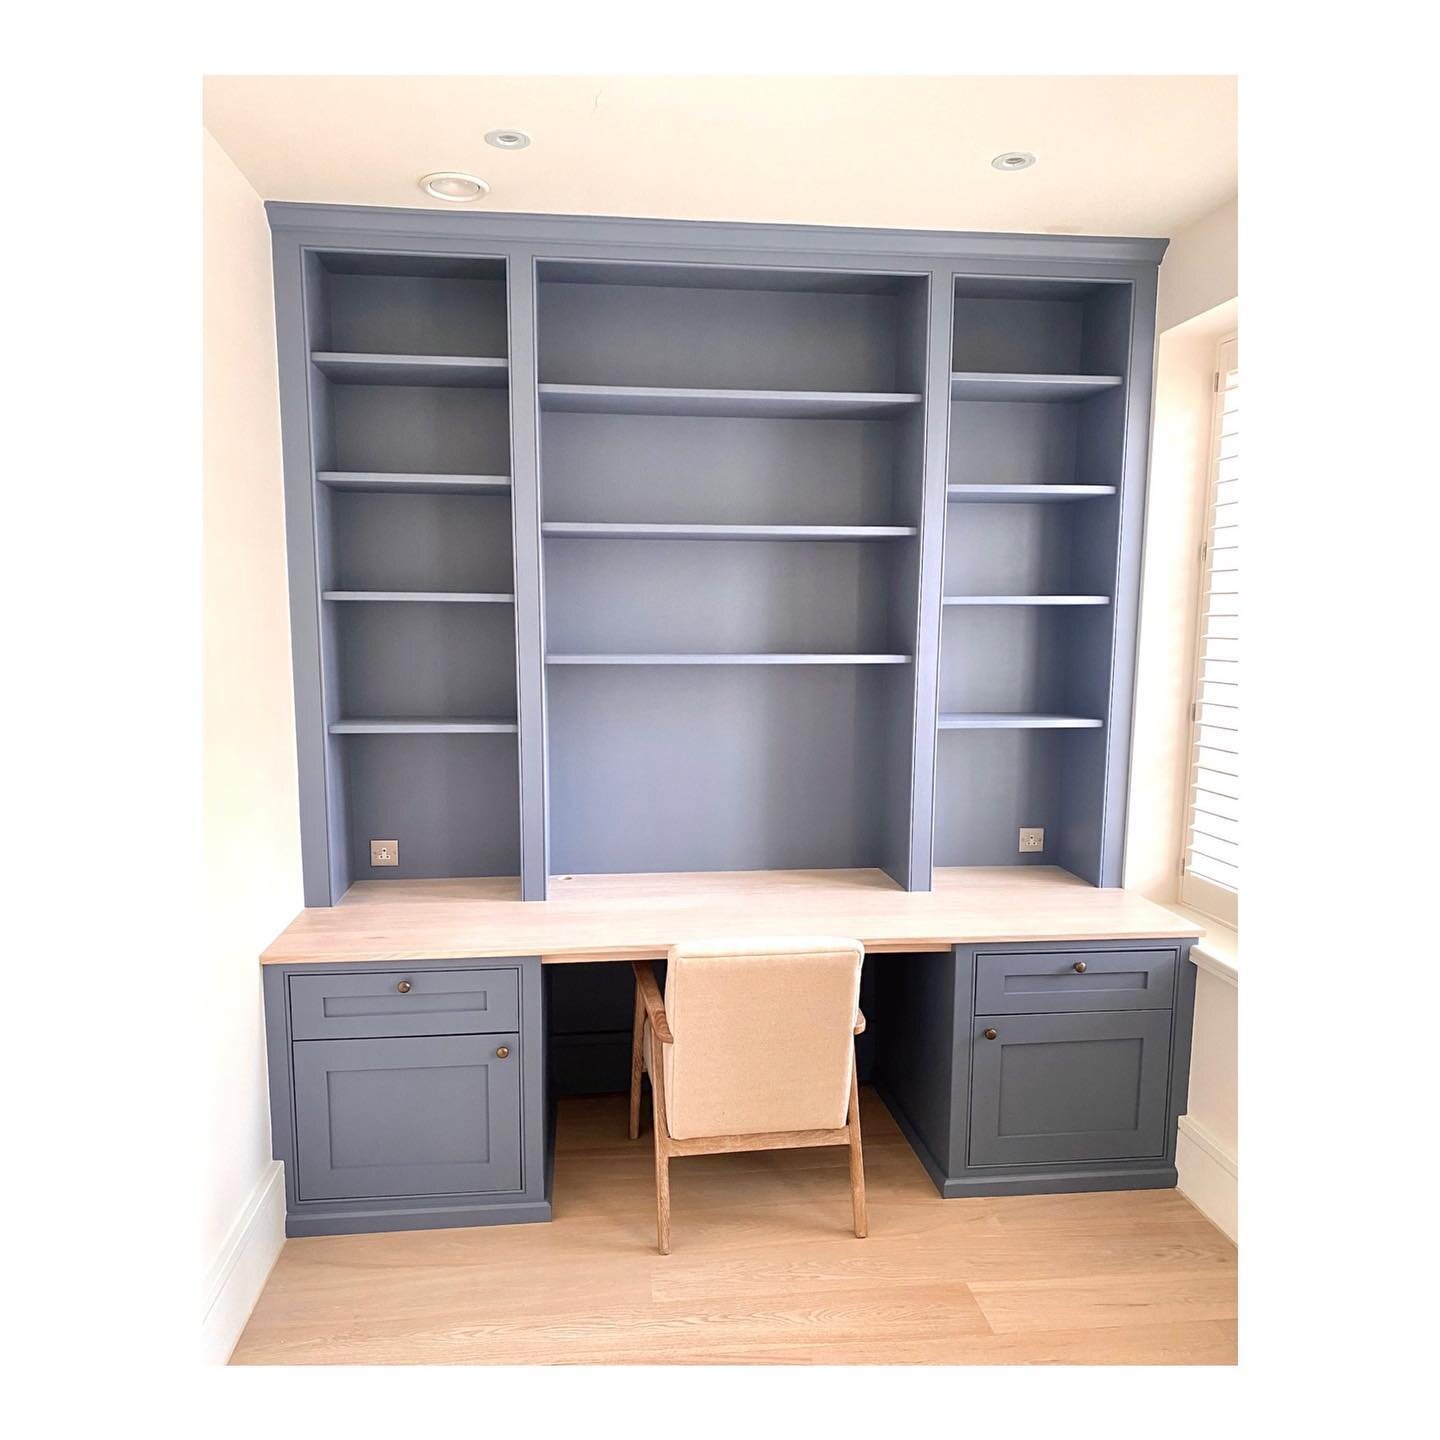 &bull; B L U E &bull; O F F I C E &bull; S P A C E &bull;
A bespoke desk and shelving unit built by Catherine, painted in &lsquo;Juniper Ash&rsquo; by Little Greene, with the oak worktop painted in soft white.

@littlegreenepaintcompany
#oliverhazael